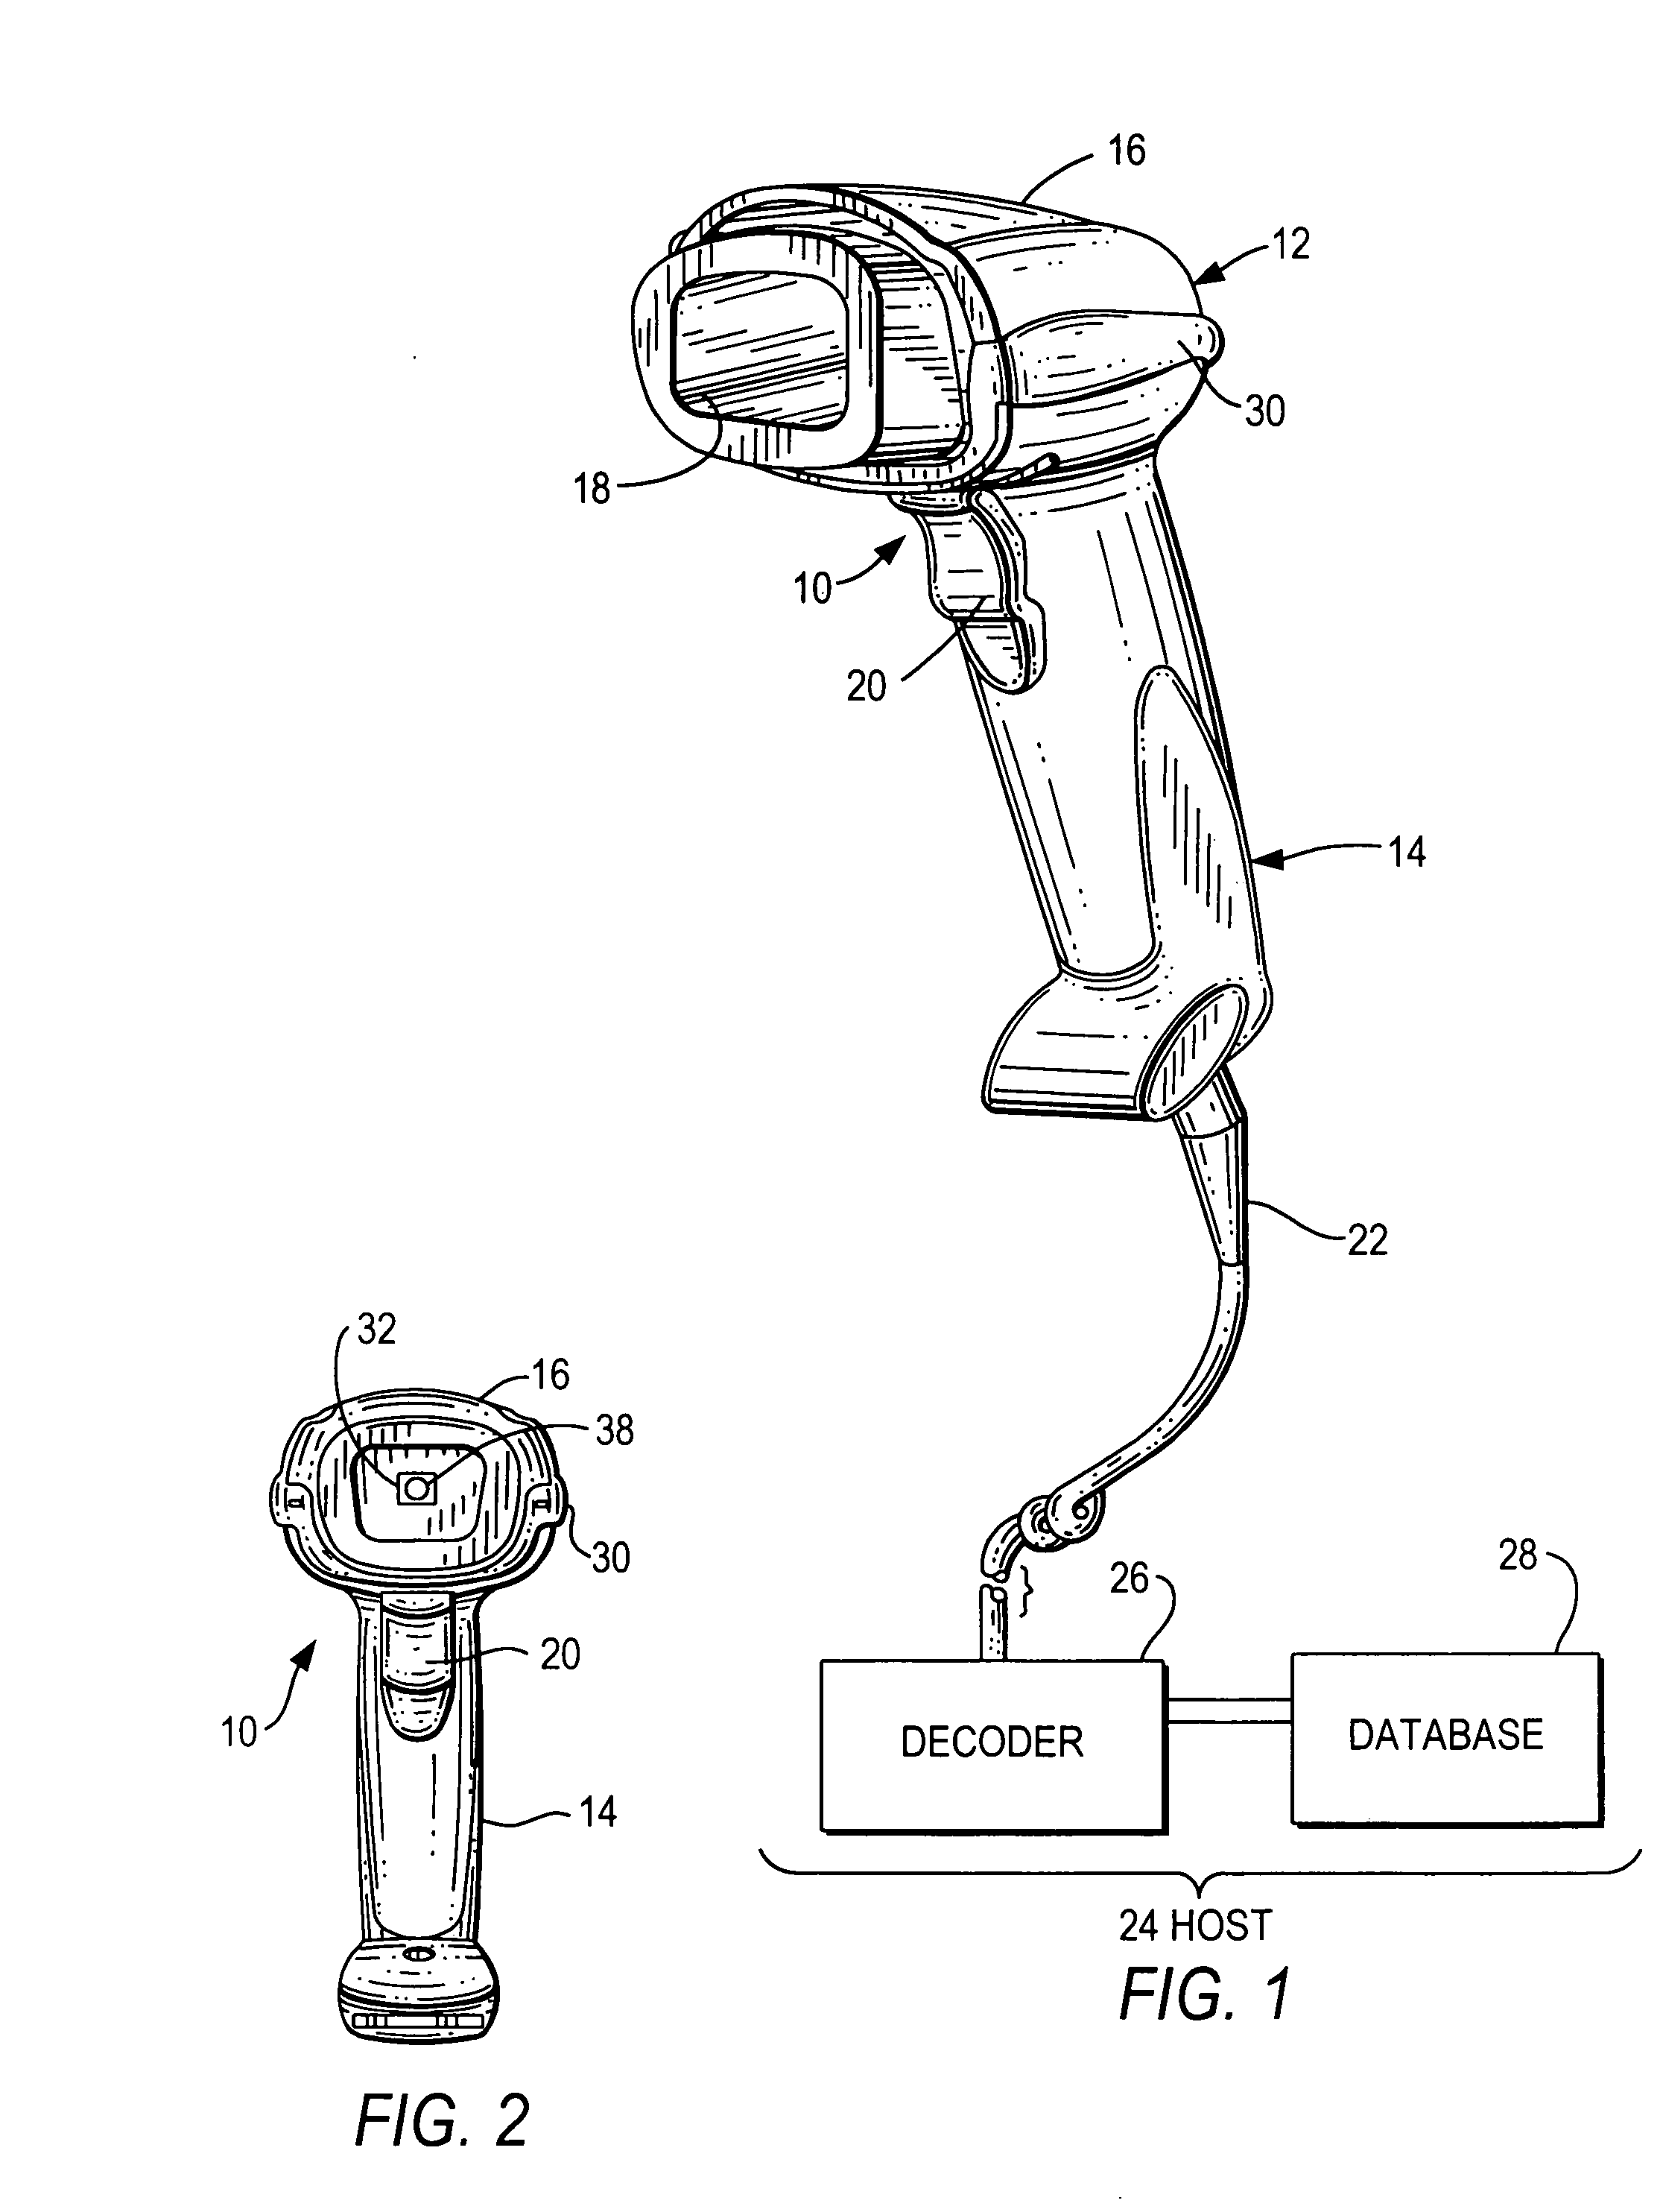 Arrangement for and method of accurately aiming at direct part markings prior to being imaged and electro-optically read